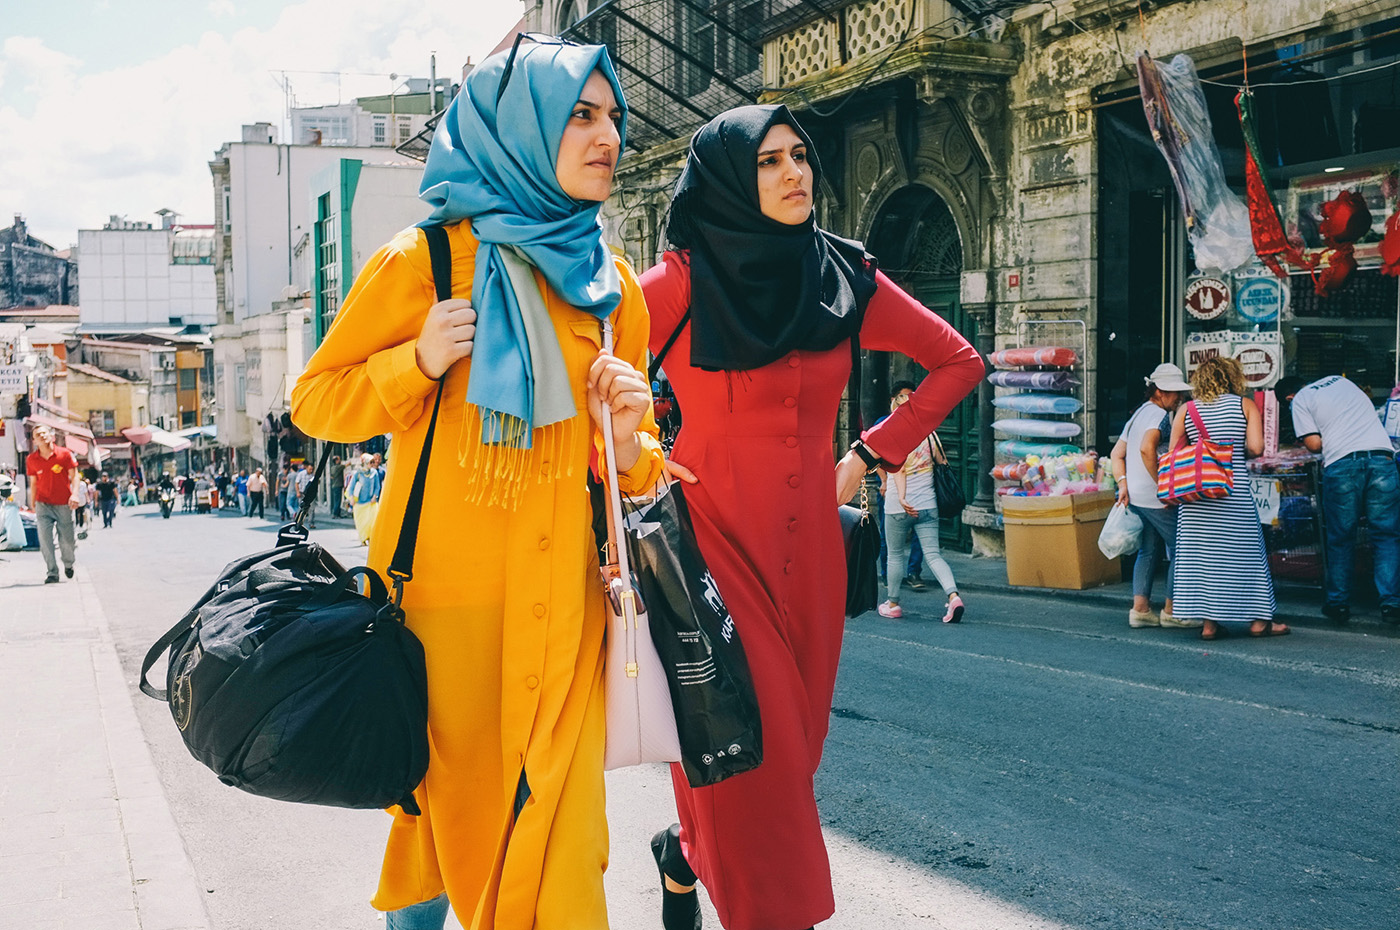 Two women shopping together in Istanbul's market district. I was the silent observer, trying to capture even a moment of authentic everyday Turkish life in one of the biggest cities in the world.